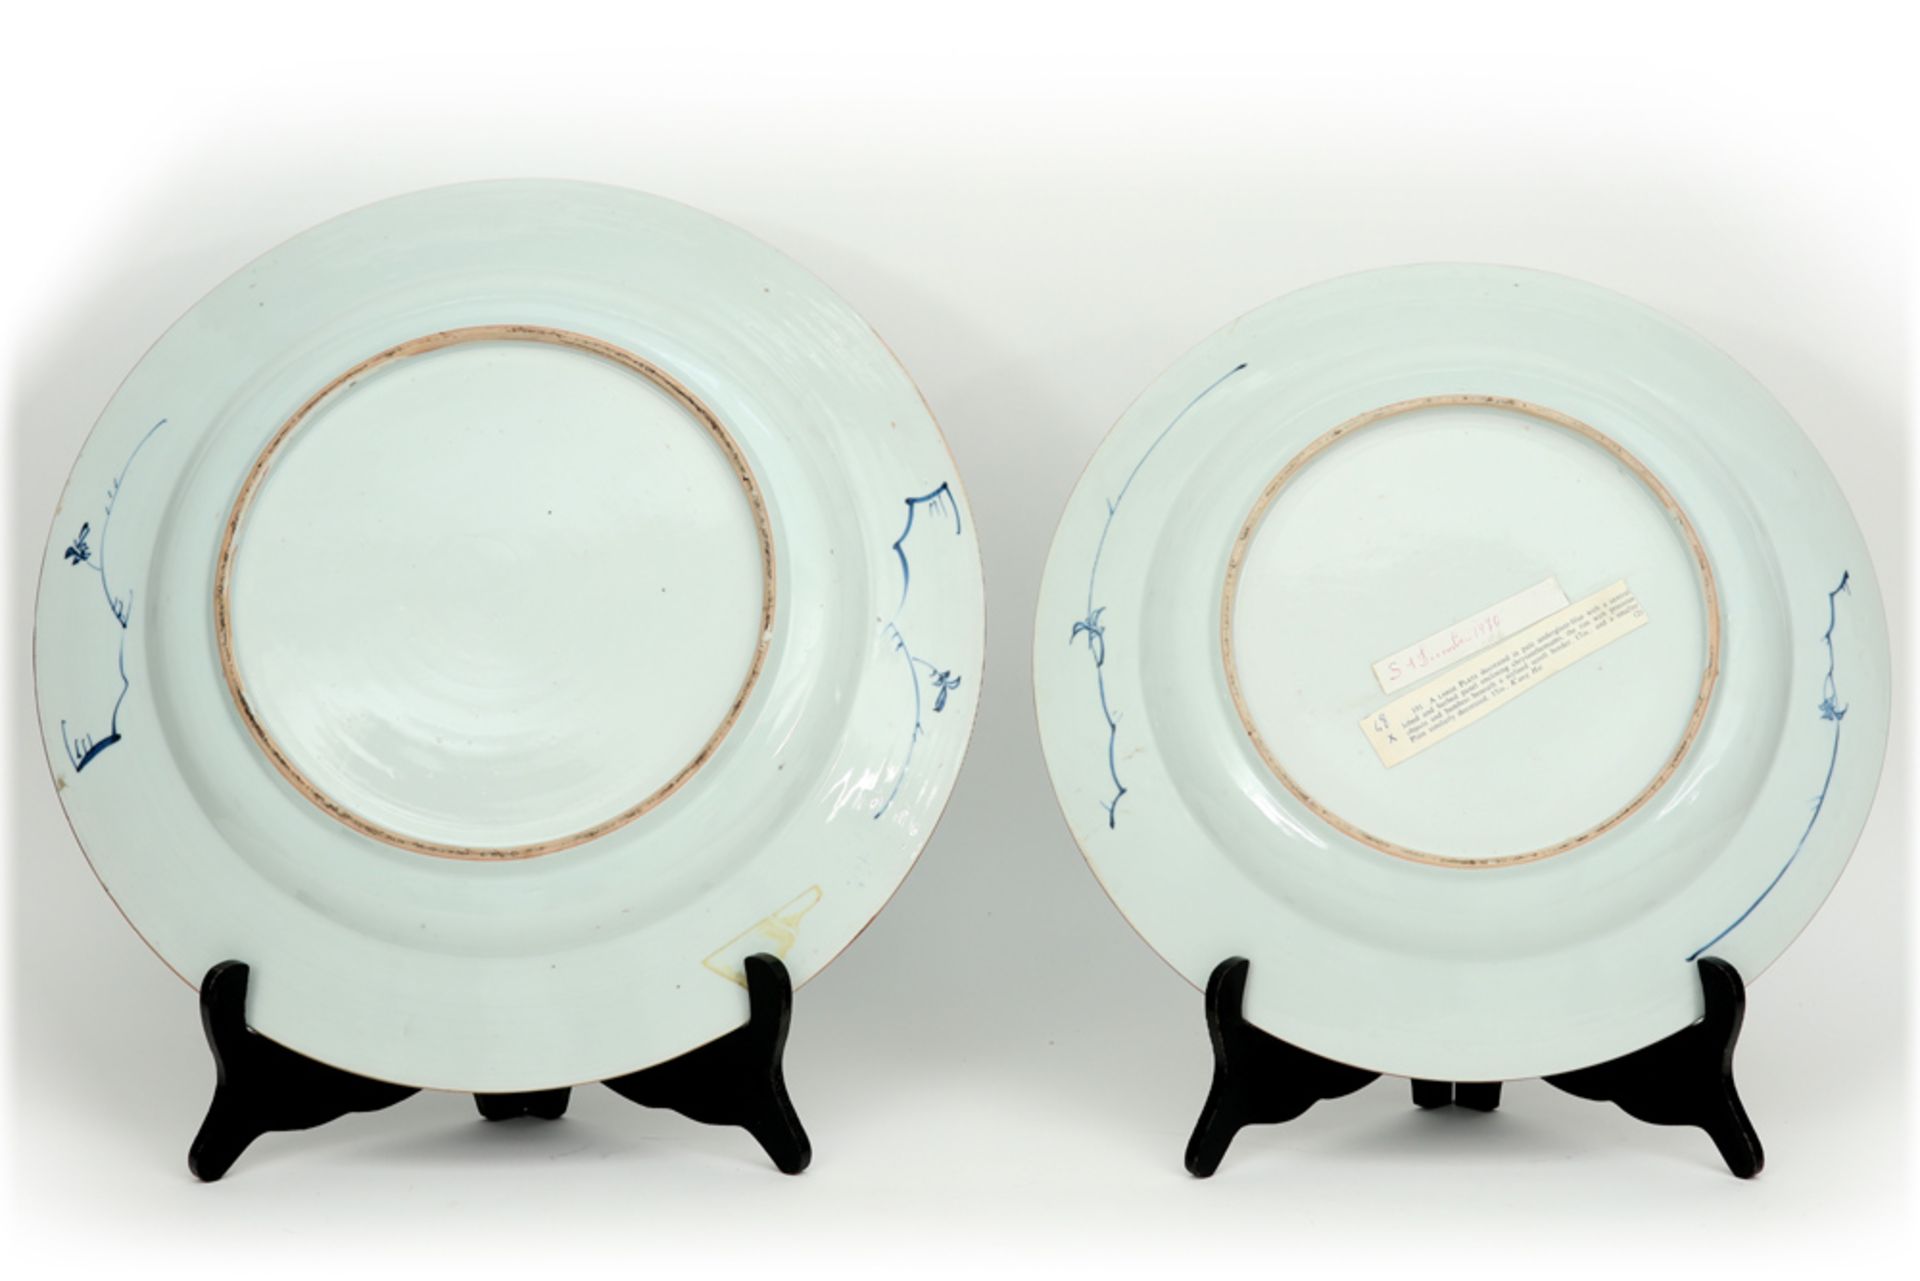 set of a bigger and a smaller 18th Cent. Chinese dish in porcelain with a quite special blue-white - Image 2 of 2